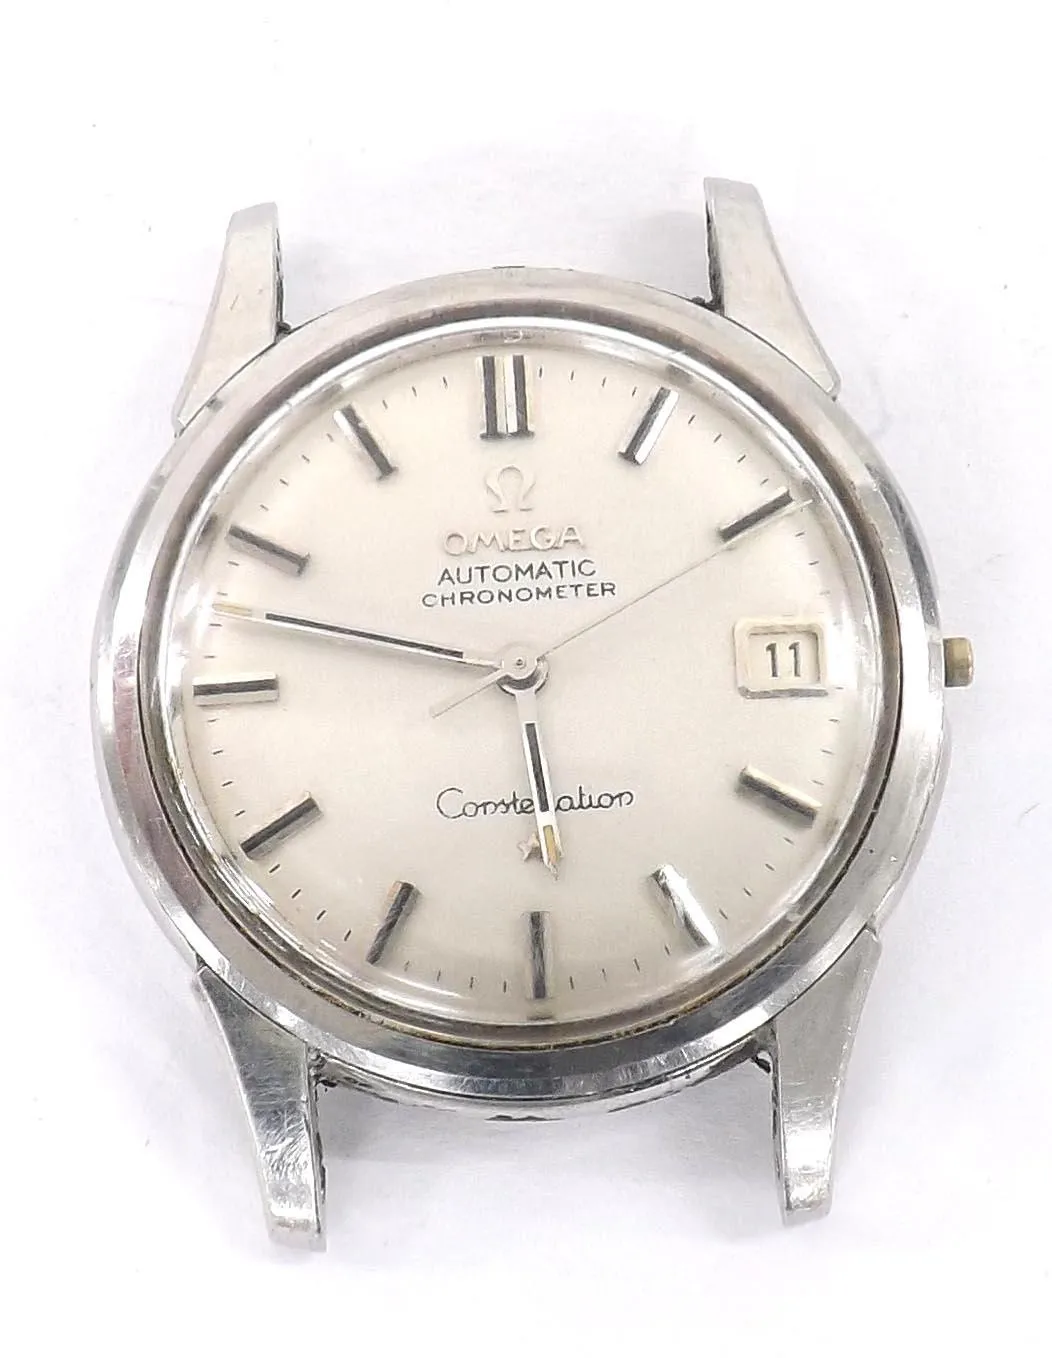 Omega Constellation 14393 61 SC 35mm Stainless steel Silver